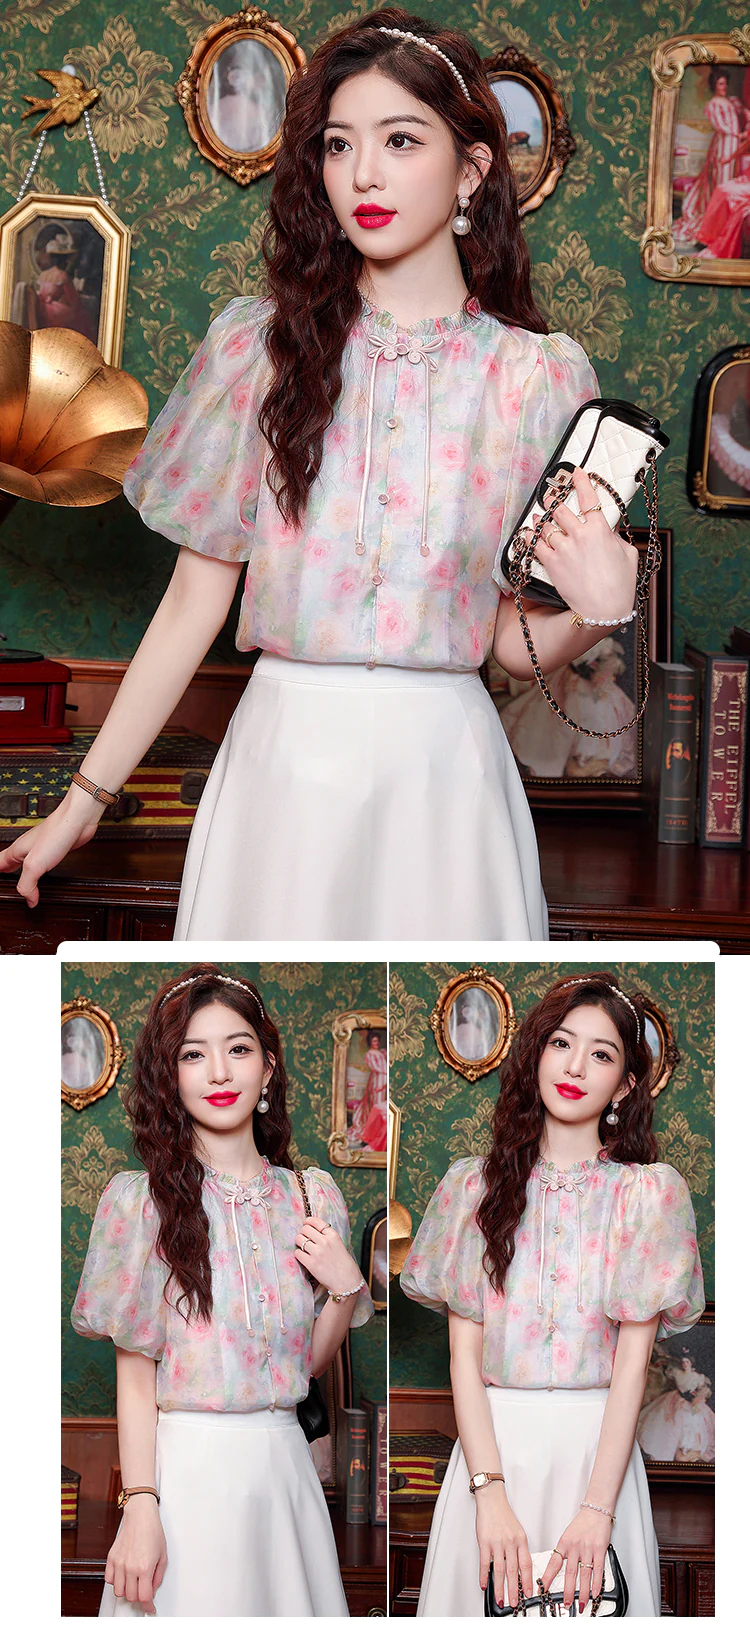 Sweet-Ladies-Summer-Casual-Floral-Chiffon-Shirt-with-Short-Puff-Sleeves09